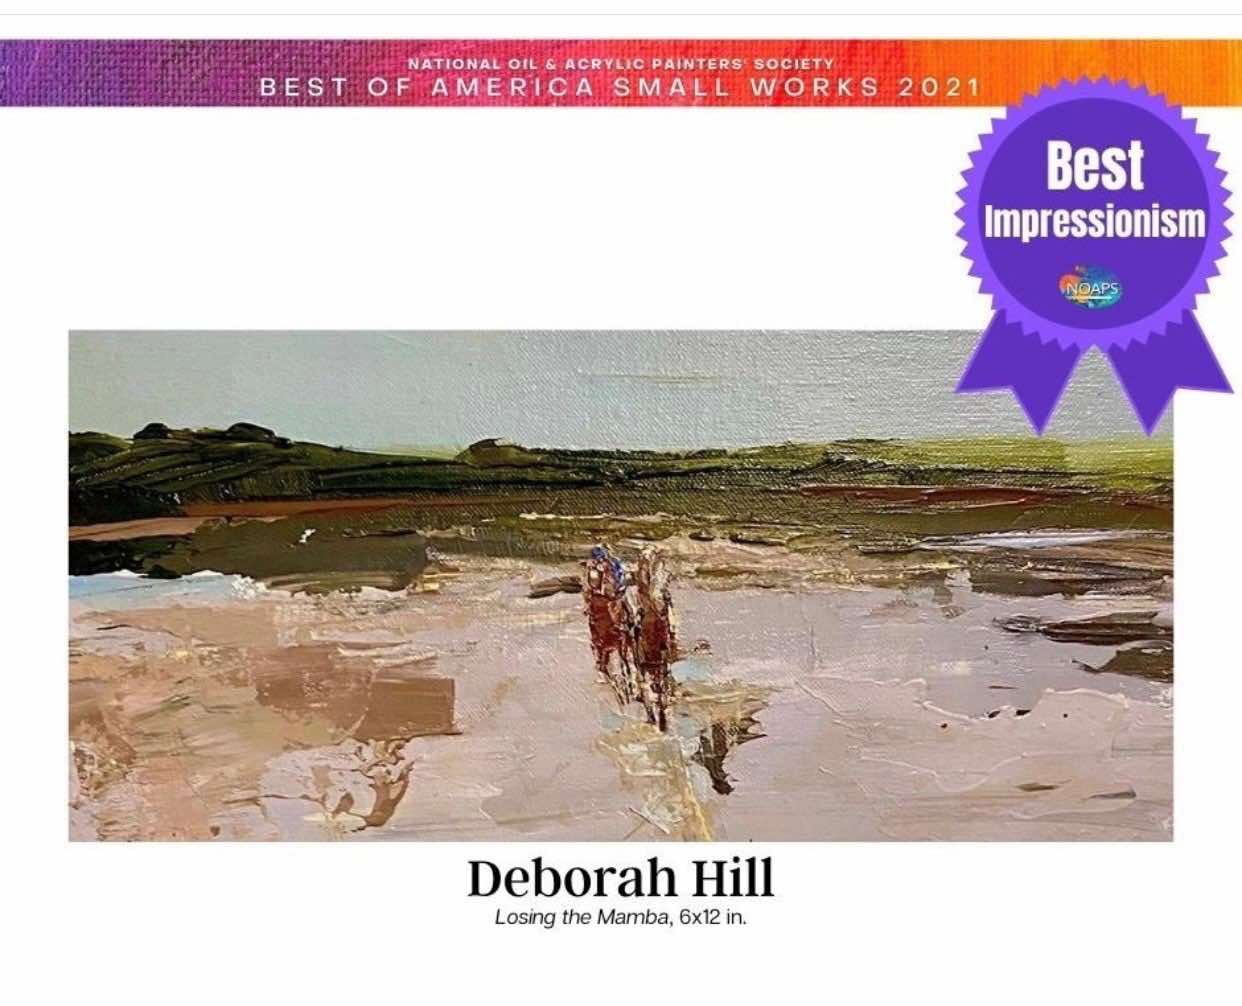 Deborah Hill wins Best Impressionist in National Acrylics & Painters Society